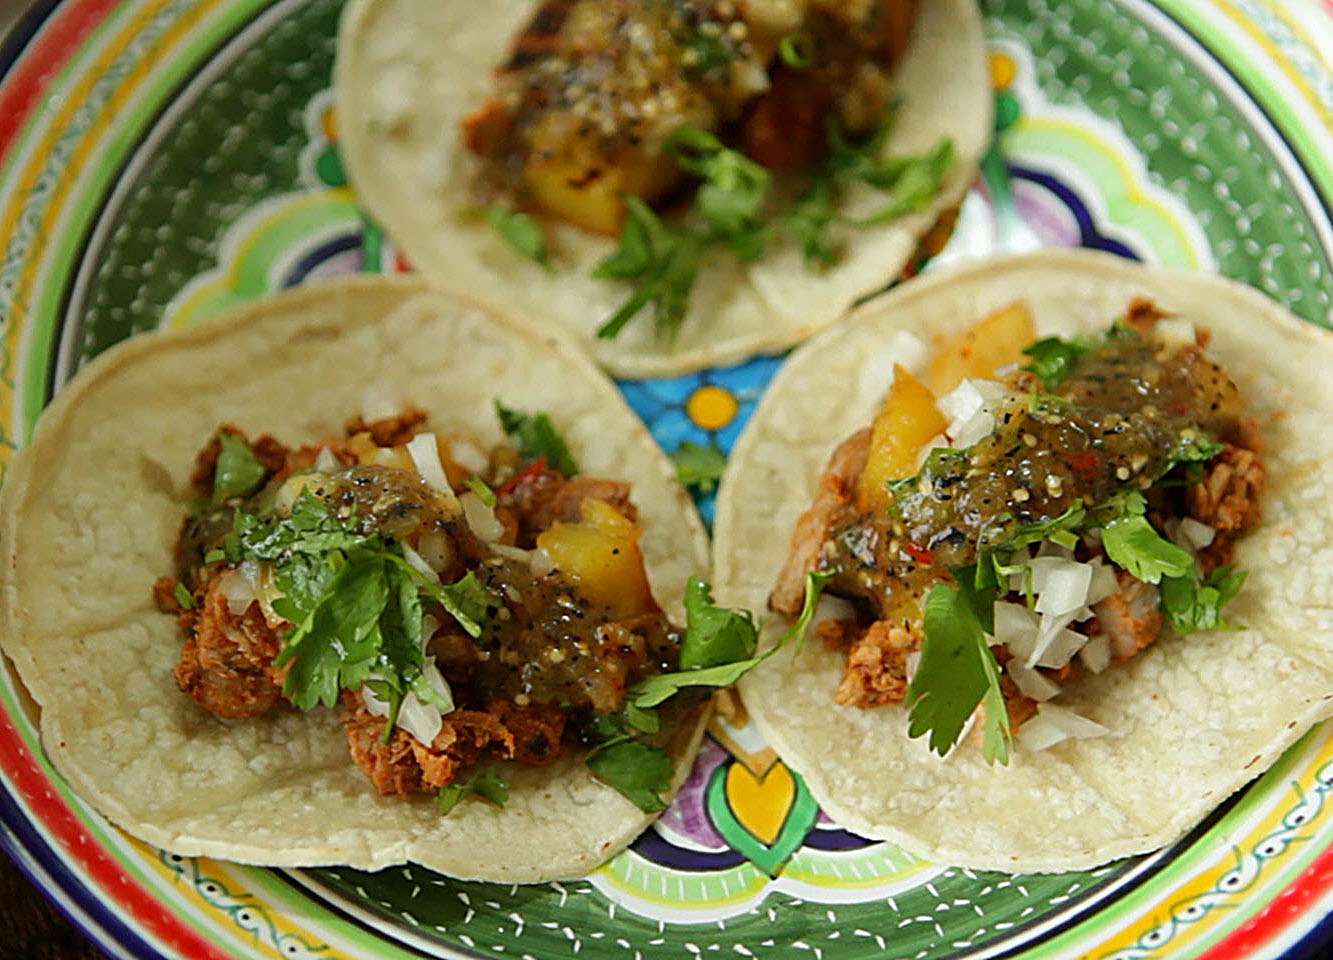 three tacos with pork, salsa verde, and cilantro on a painted ceramic plate